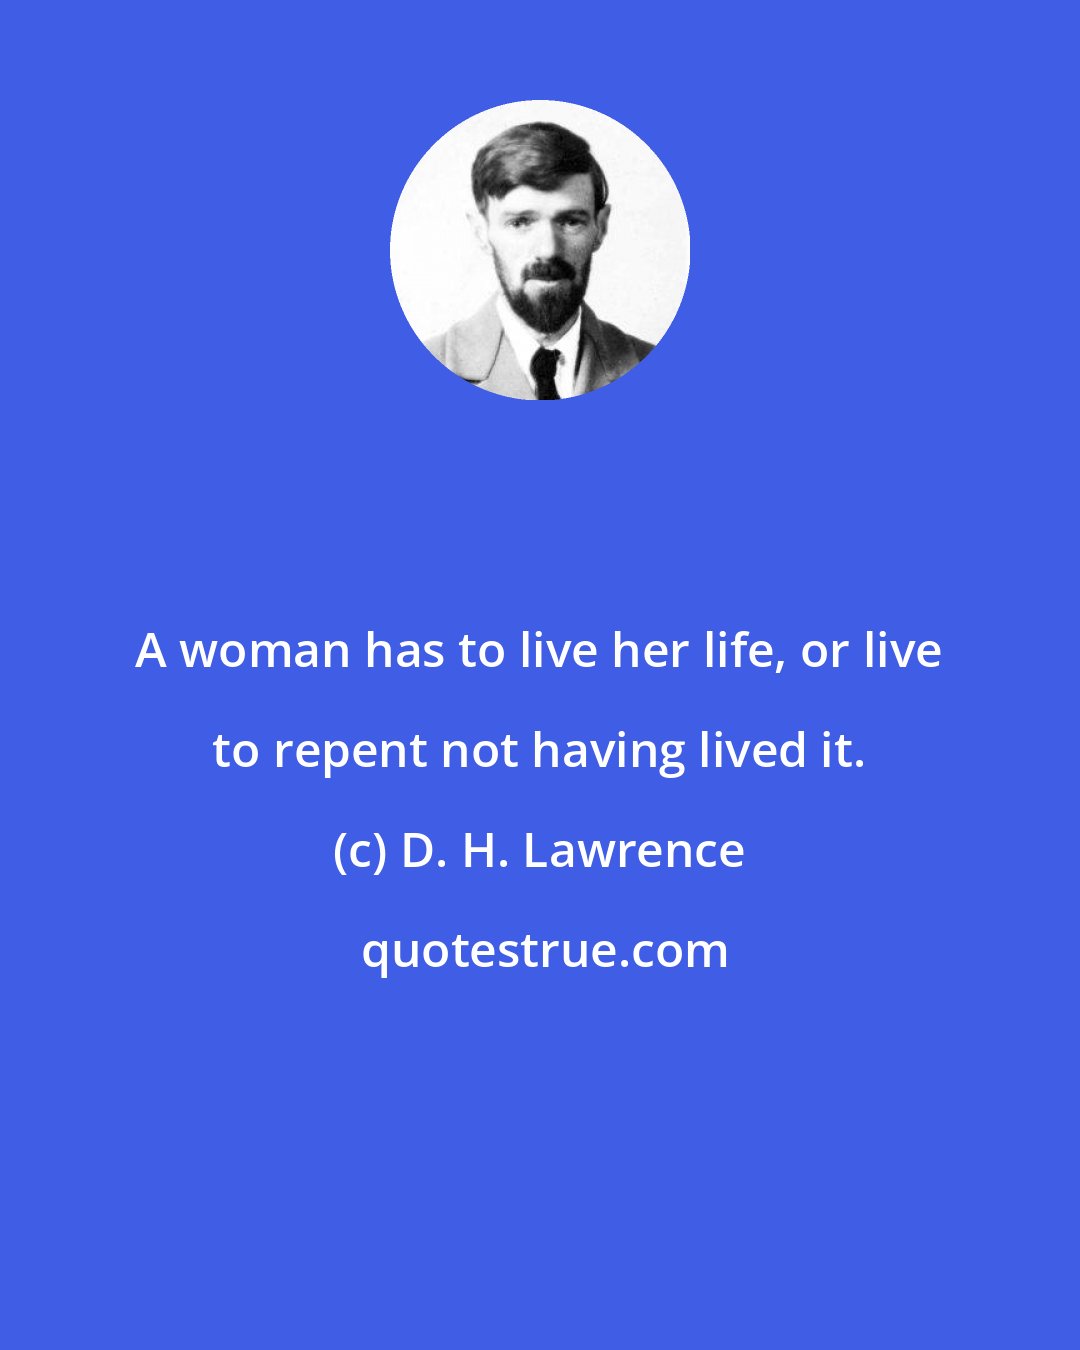 D. H. Lawrence: A woman has to live her life, or live to repent not having lived it.